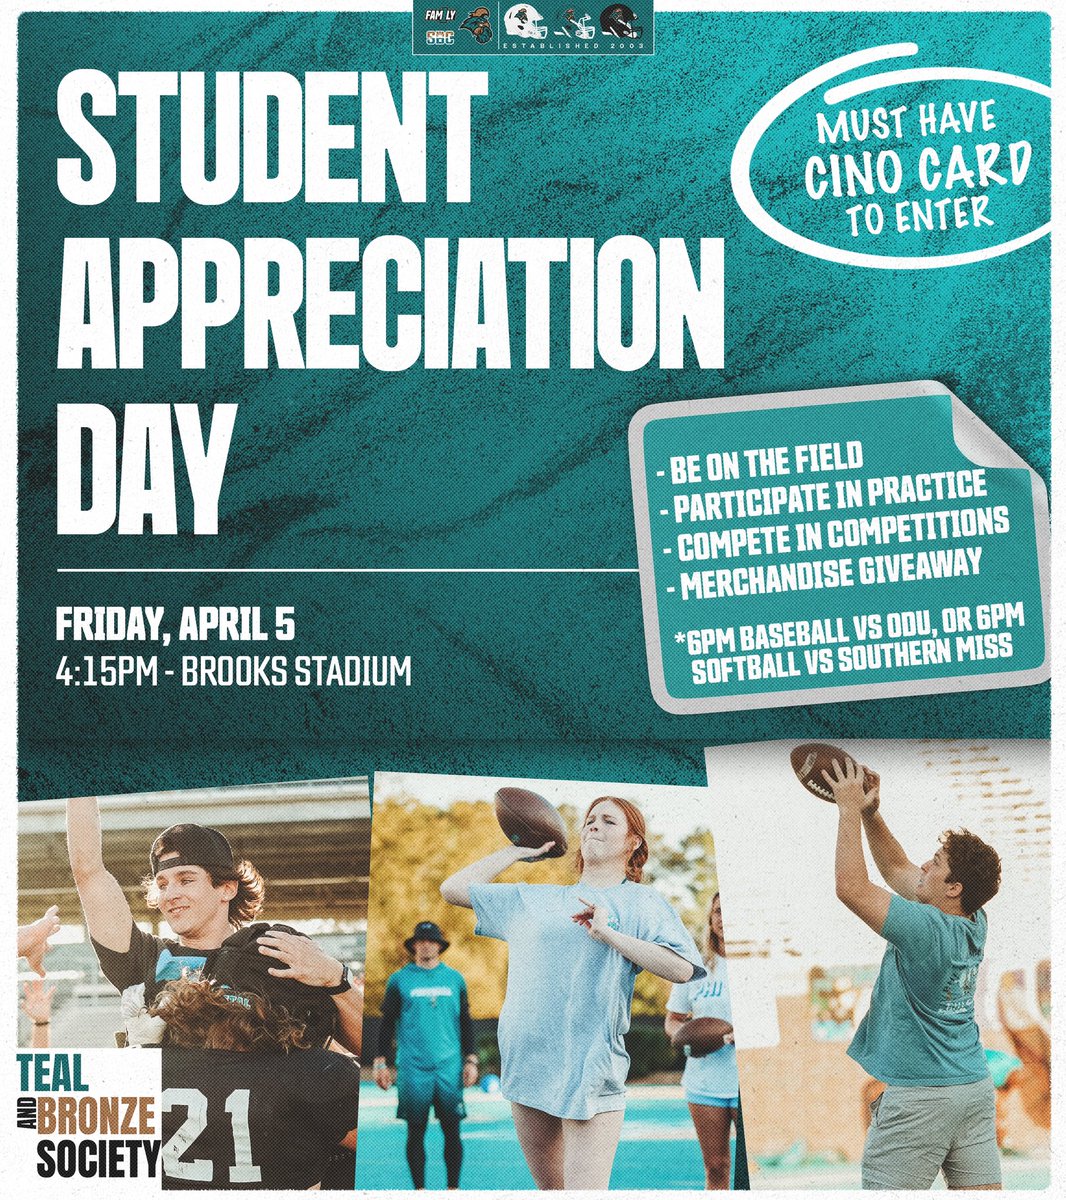 So you think you can ball? 🏈 Come practice with the Chants next Friday before the @CoastalBaseball and @CoastalSoftball games for Student Appreciation Day! 🗓️April 5 ⏰4:15pm 📍Brooks Stadium 🪪 Bring CINO card for admission! #BALLATTHEBEACH | #FAM1LY | #TEALNATION